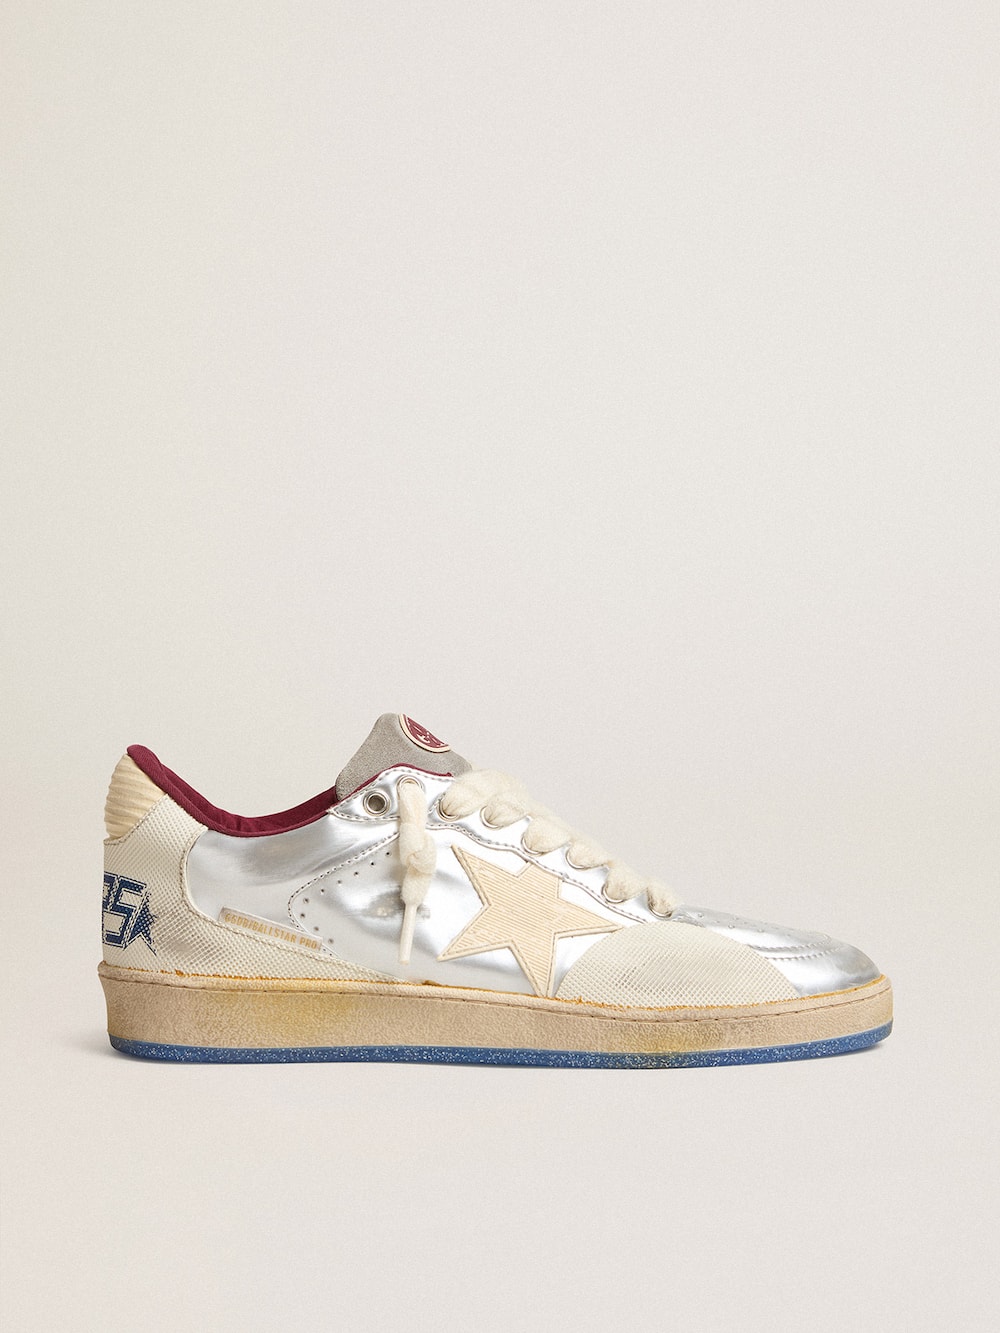 Golden Goose - Men’s Ball Star Pro in silver metallic leather with cream-colored star in 